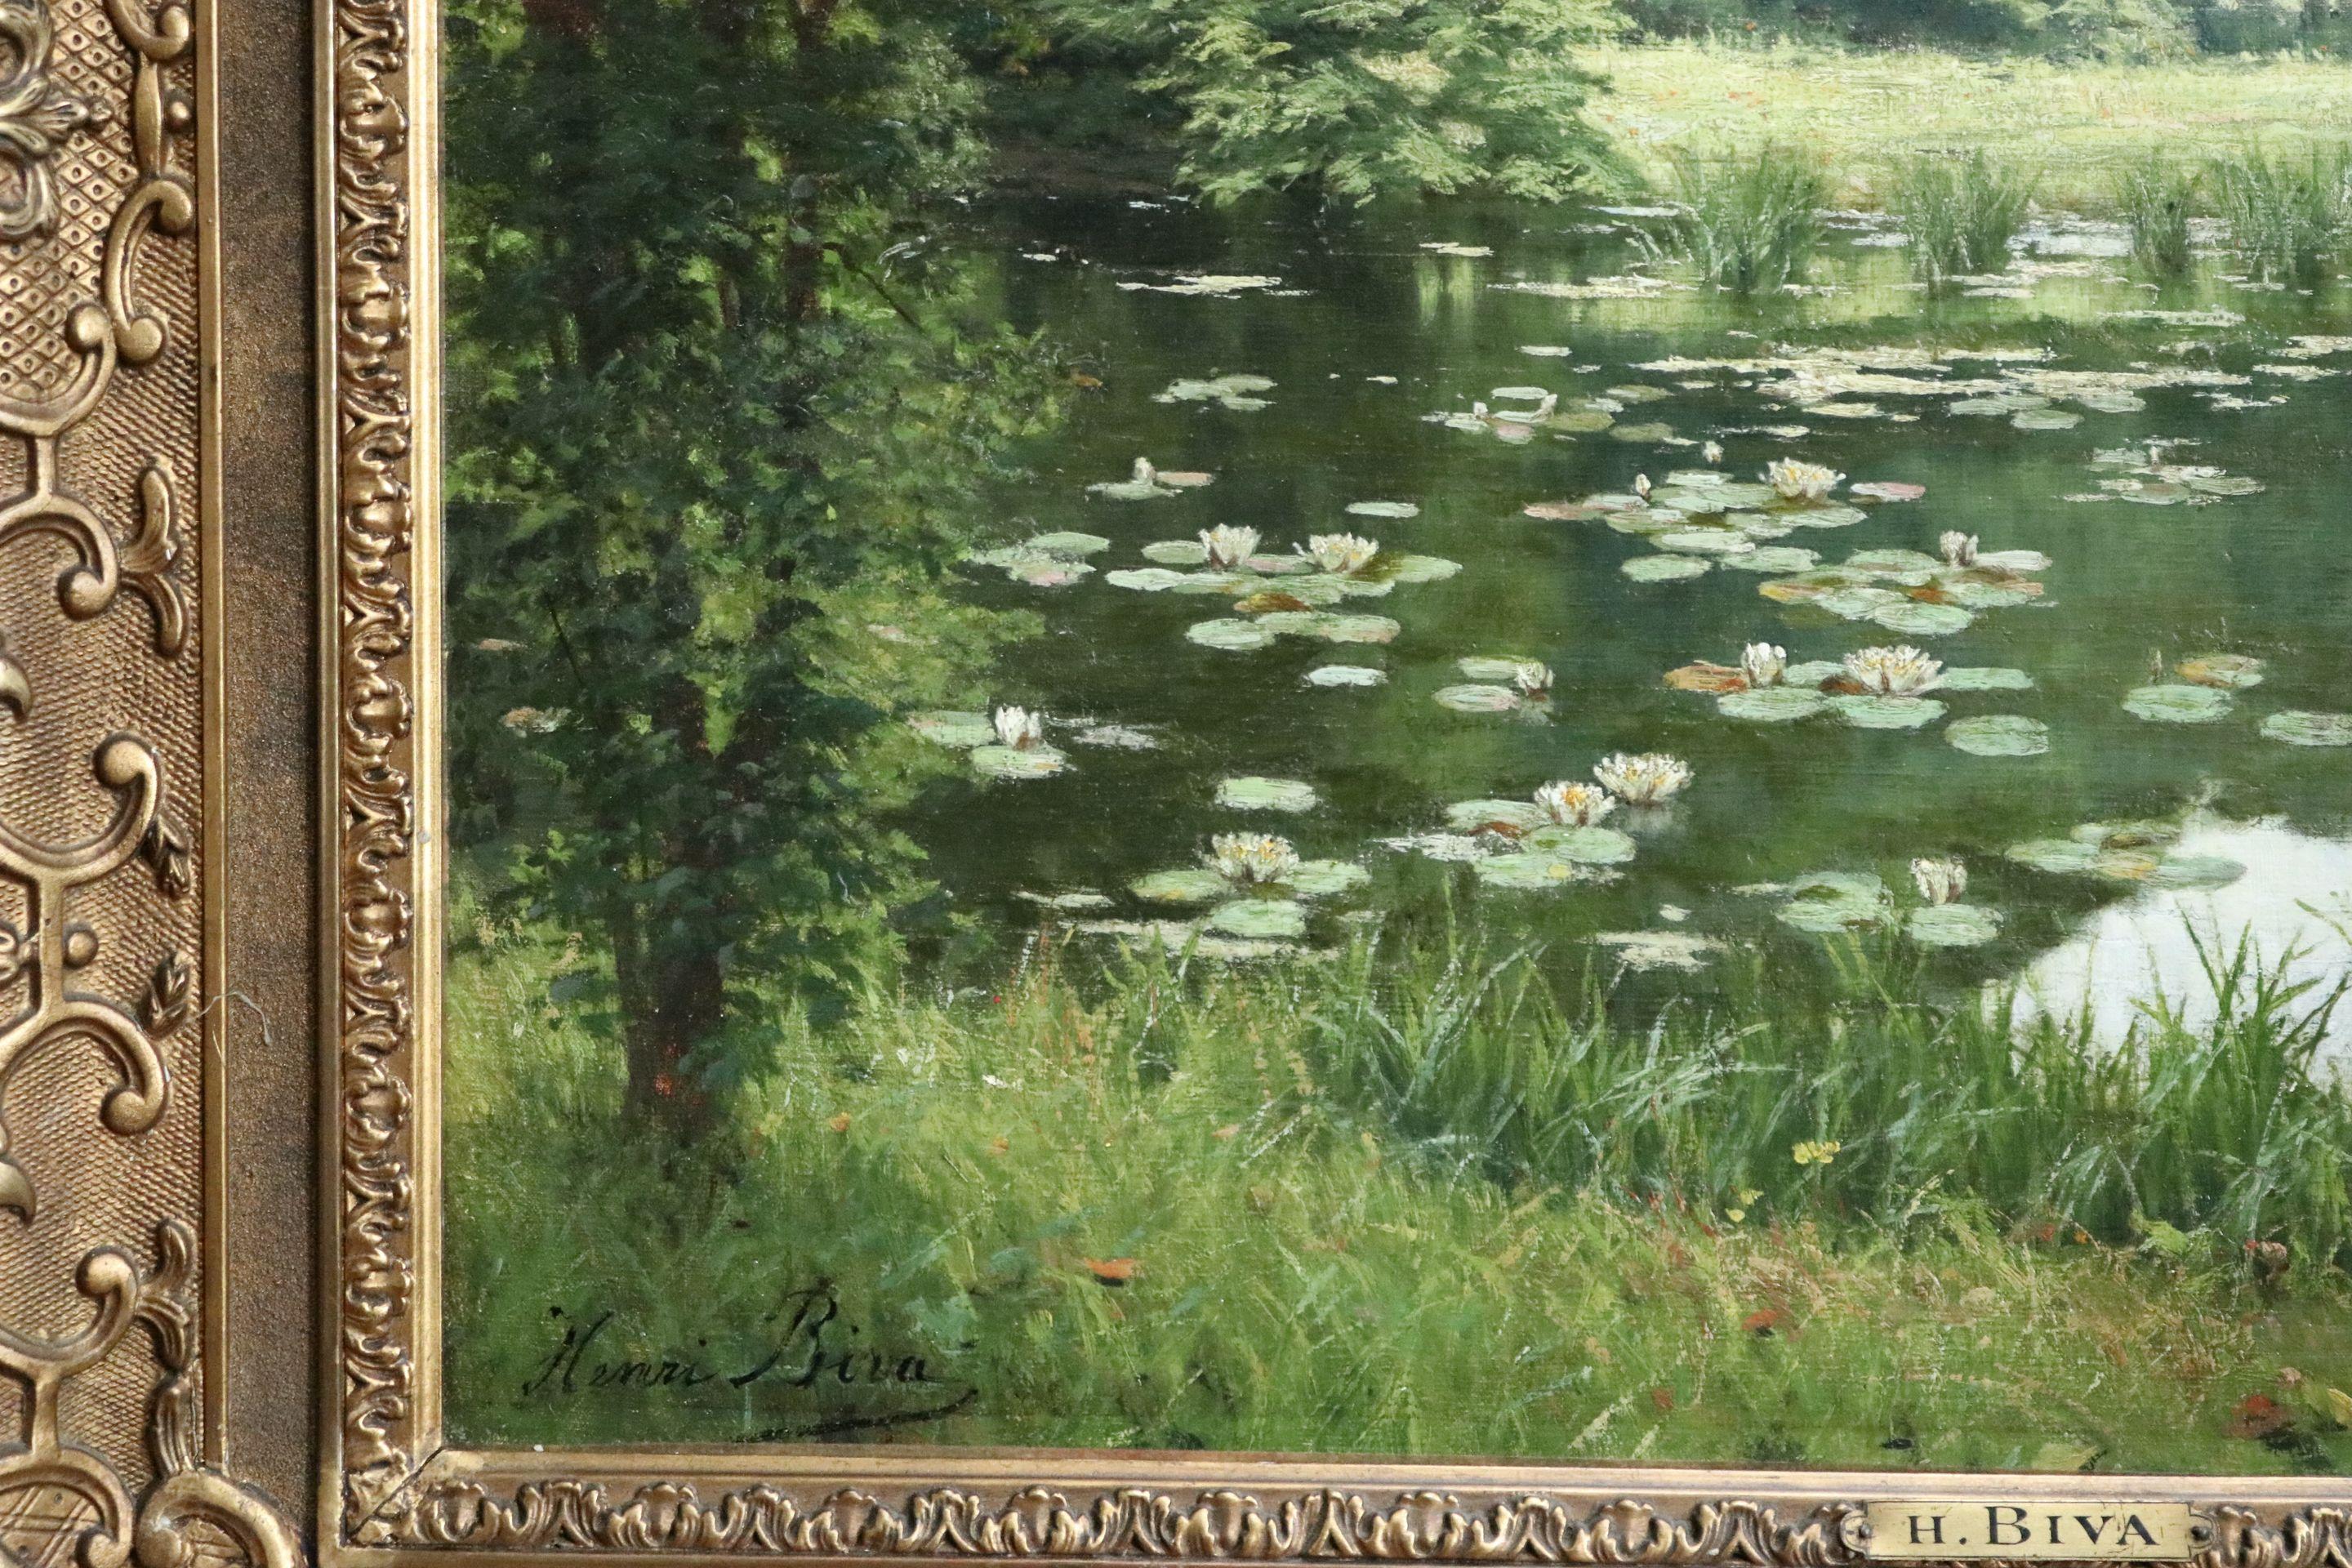 Oil on canvas by Henri Biva depicting waterlilies on a pond in a picturesque landscape. Signed lower left. Framed dimensions are 31 inches high by 36 inches wide.

Henri Biva studied under Alexandre Nozal and Léon Tanzi (1846-1913); and in 1896, he